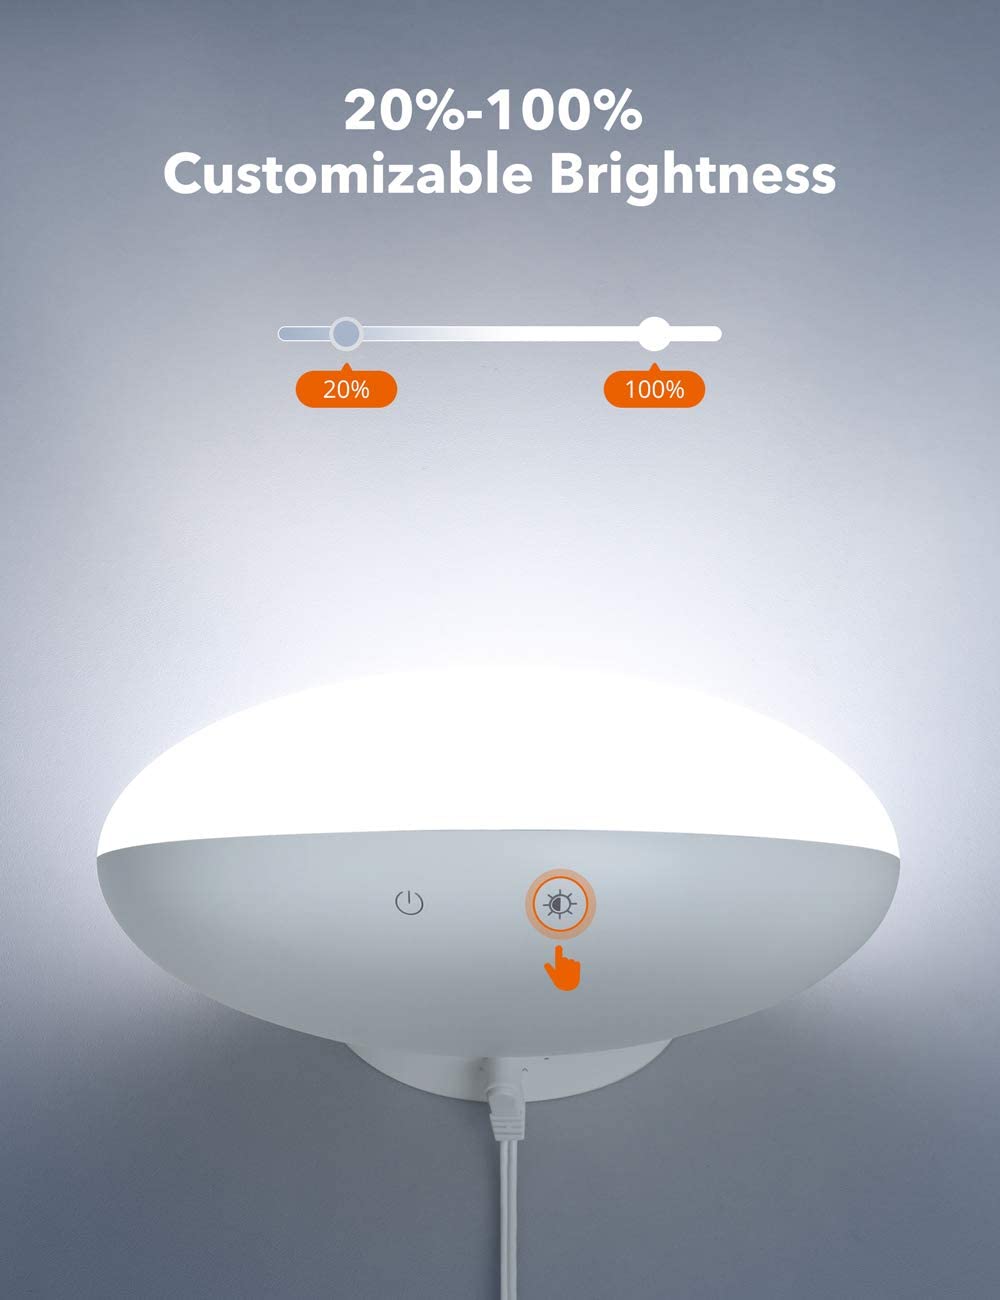 Light Therapy Lamp 19, 10000 Lux LED Light Source-TaoTronics